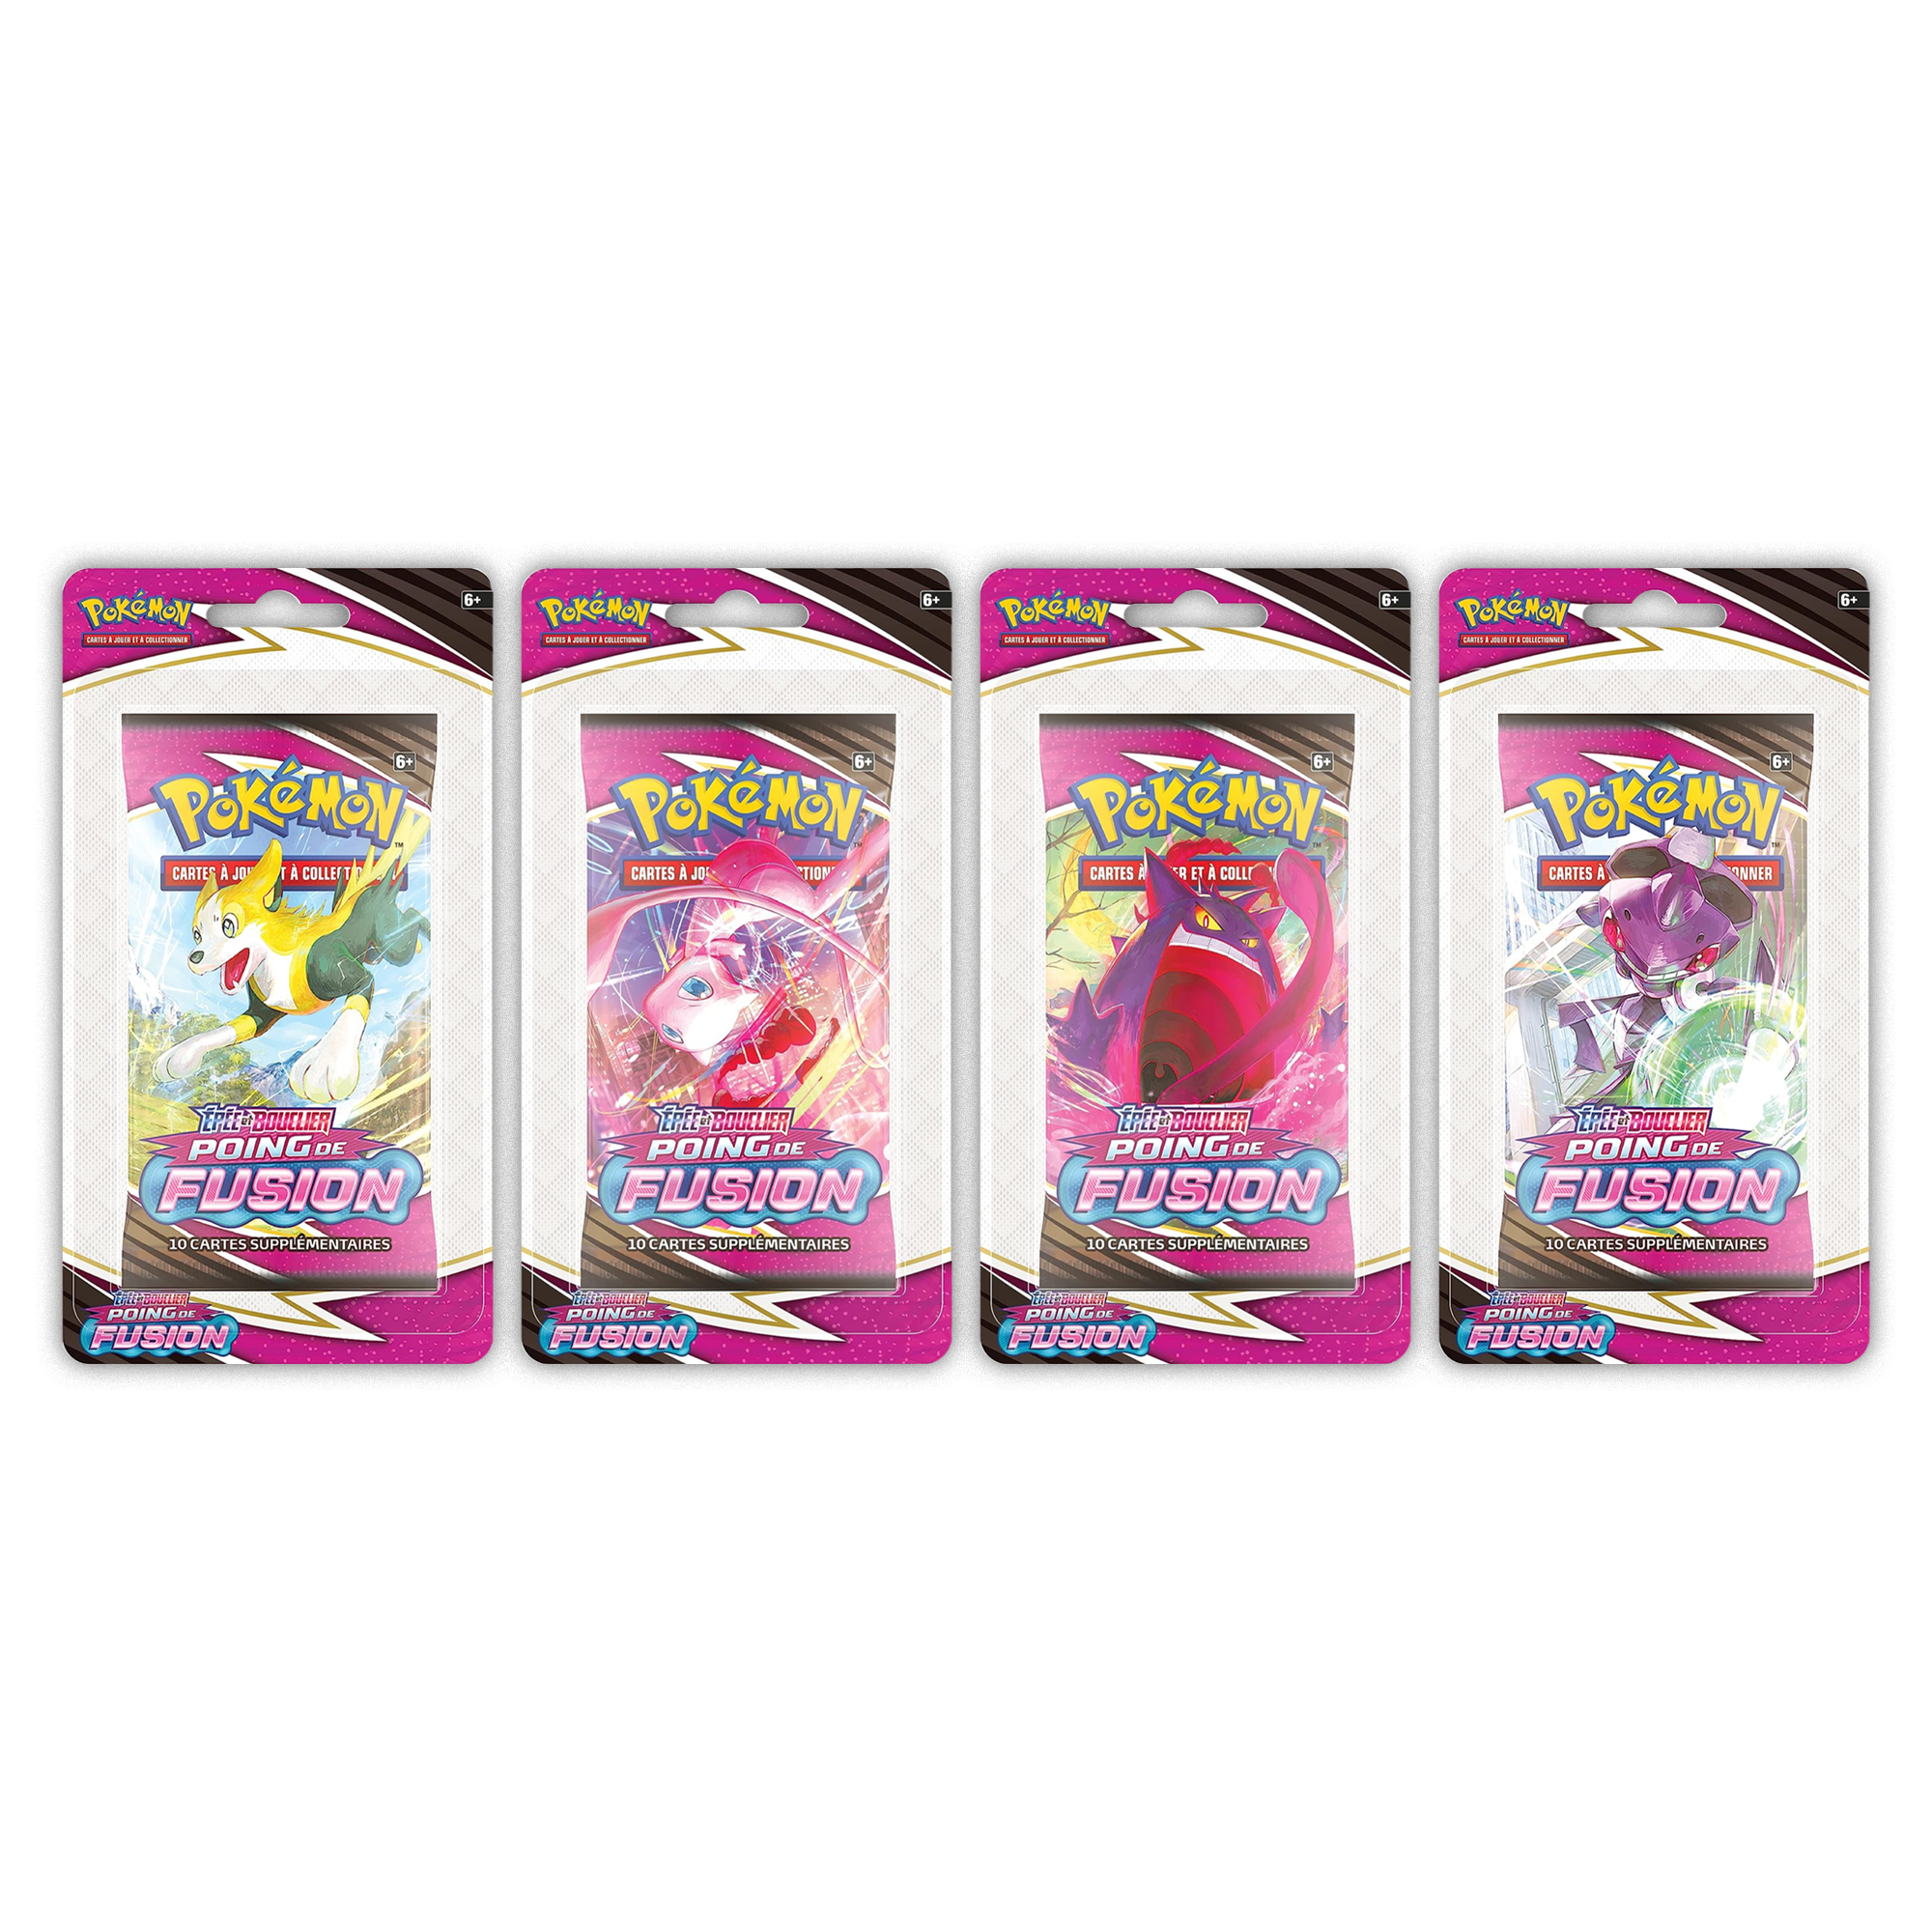 [ARTSET] Boosters Blister - EB08 - Poing de Fusion [FR]